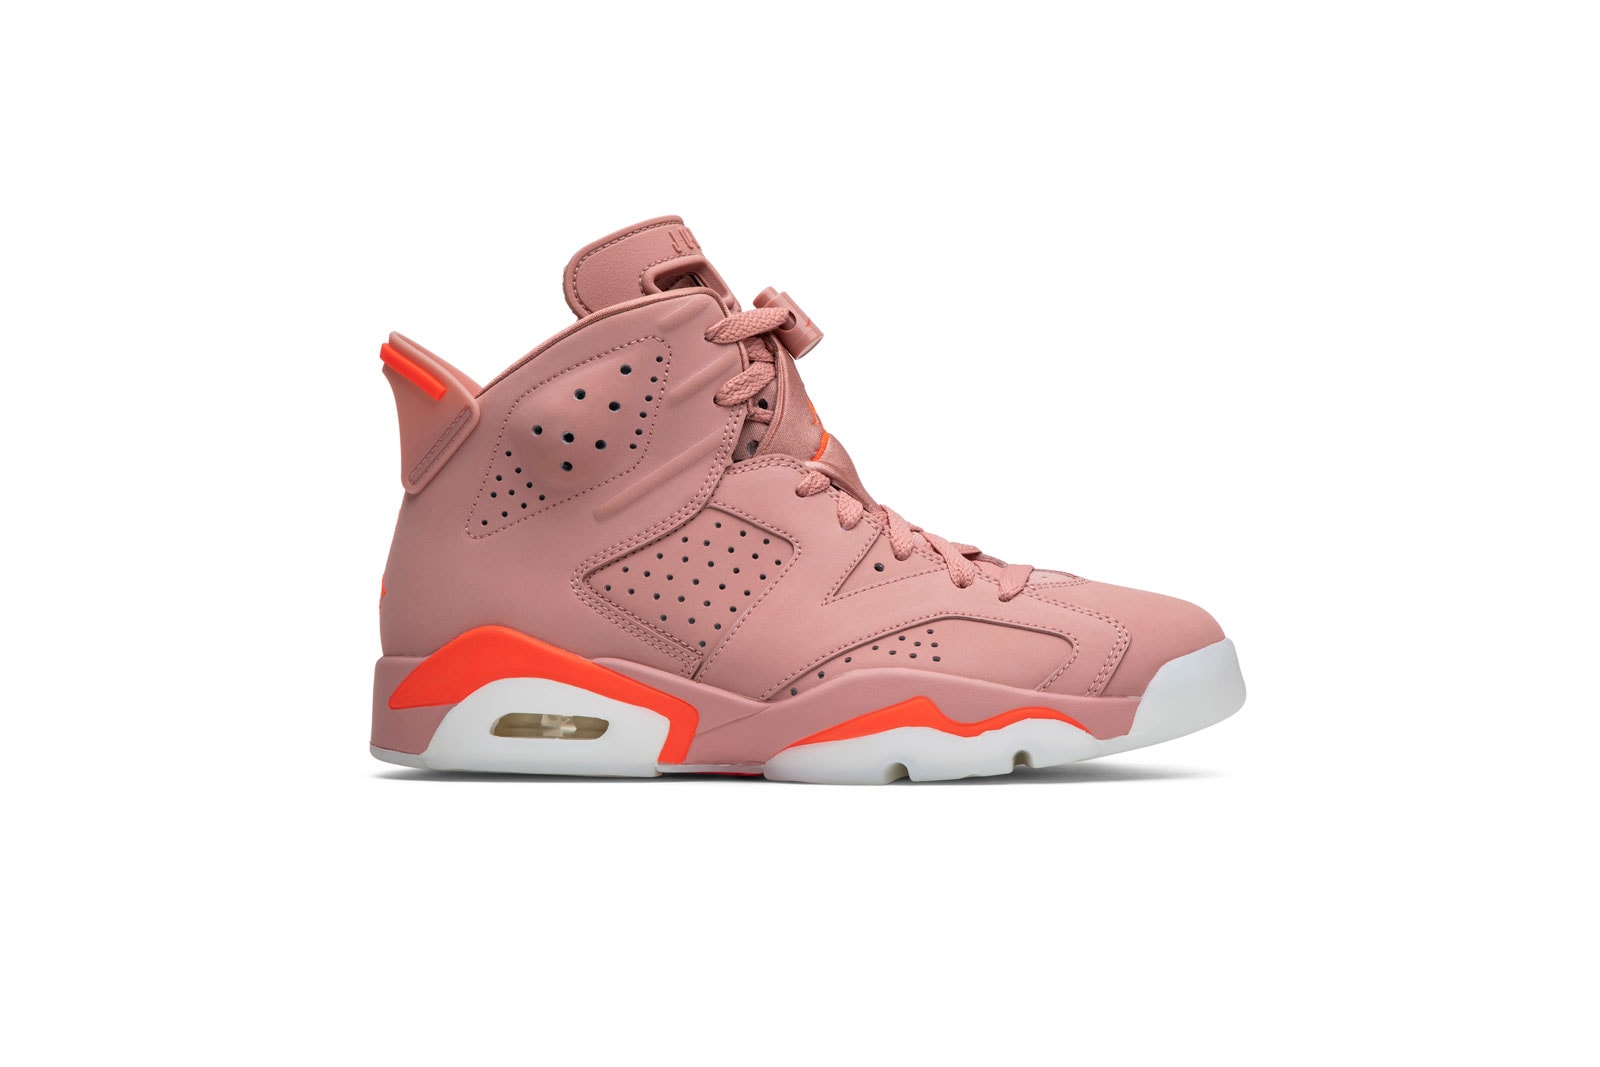 GOAT celebrates singles day with the season's 8 top air jordans styles